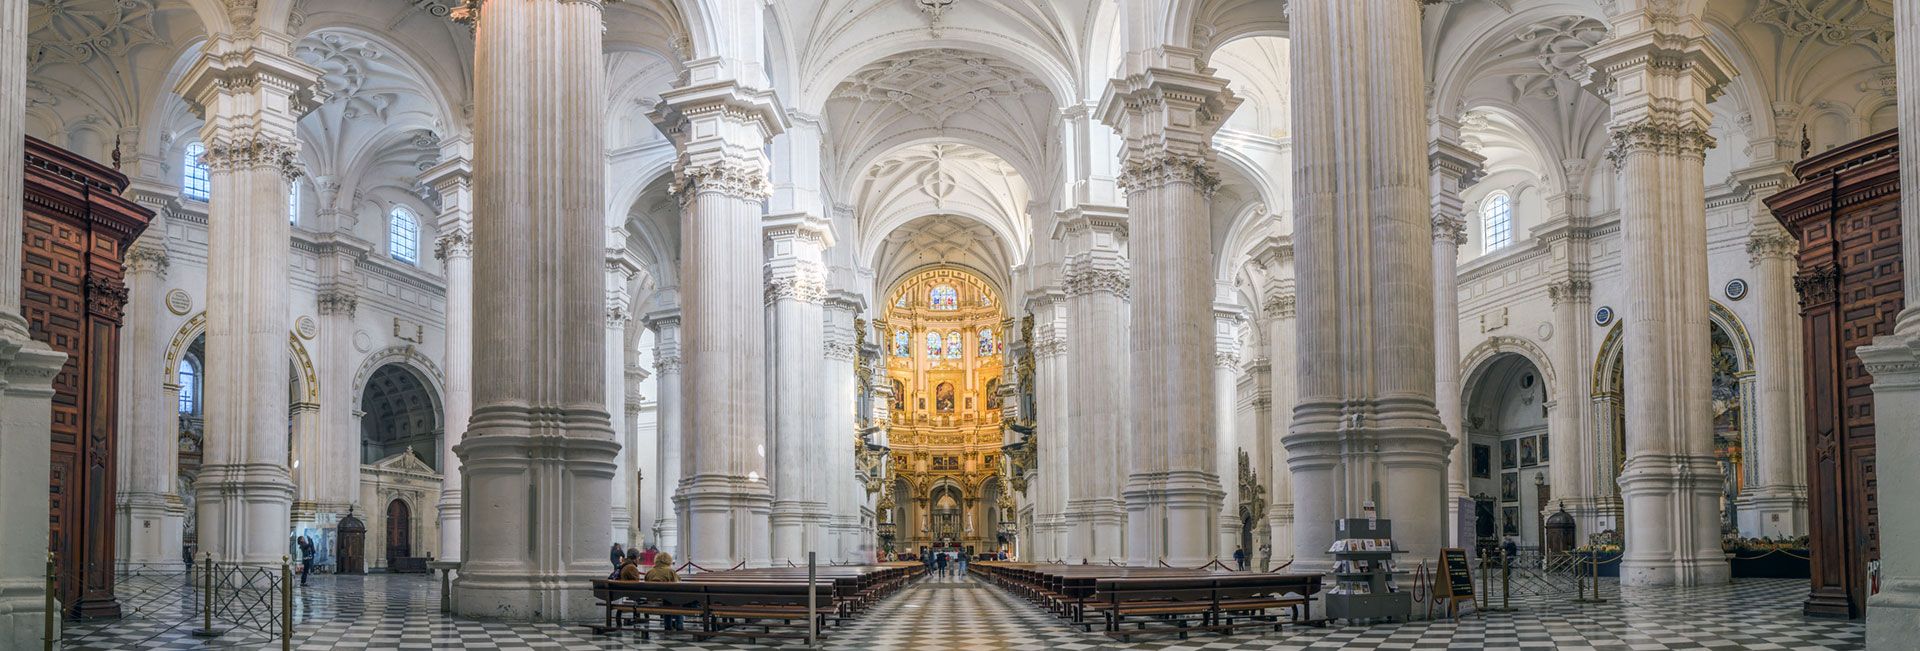 Buy tickets online to the Cathedral of Granada